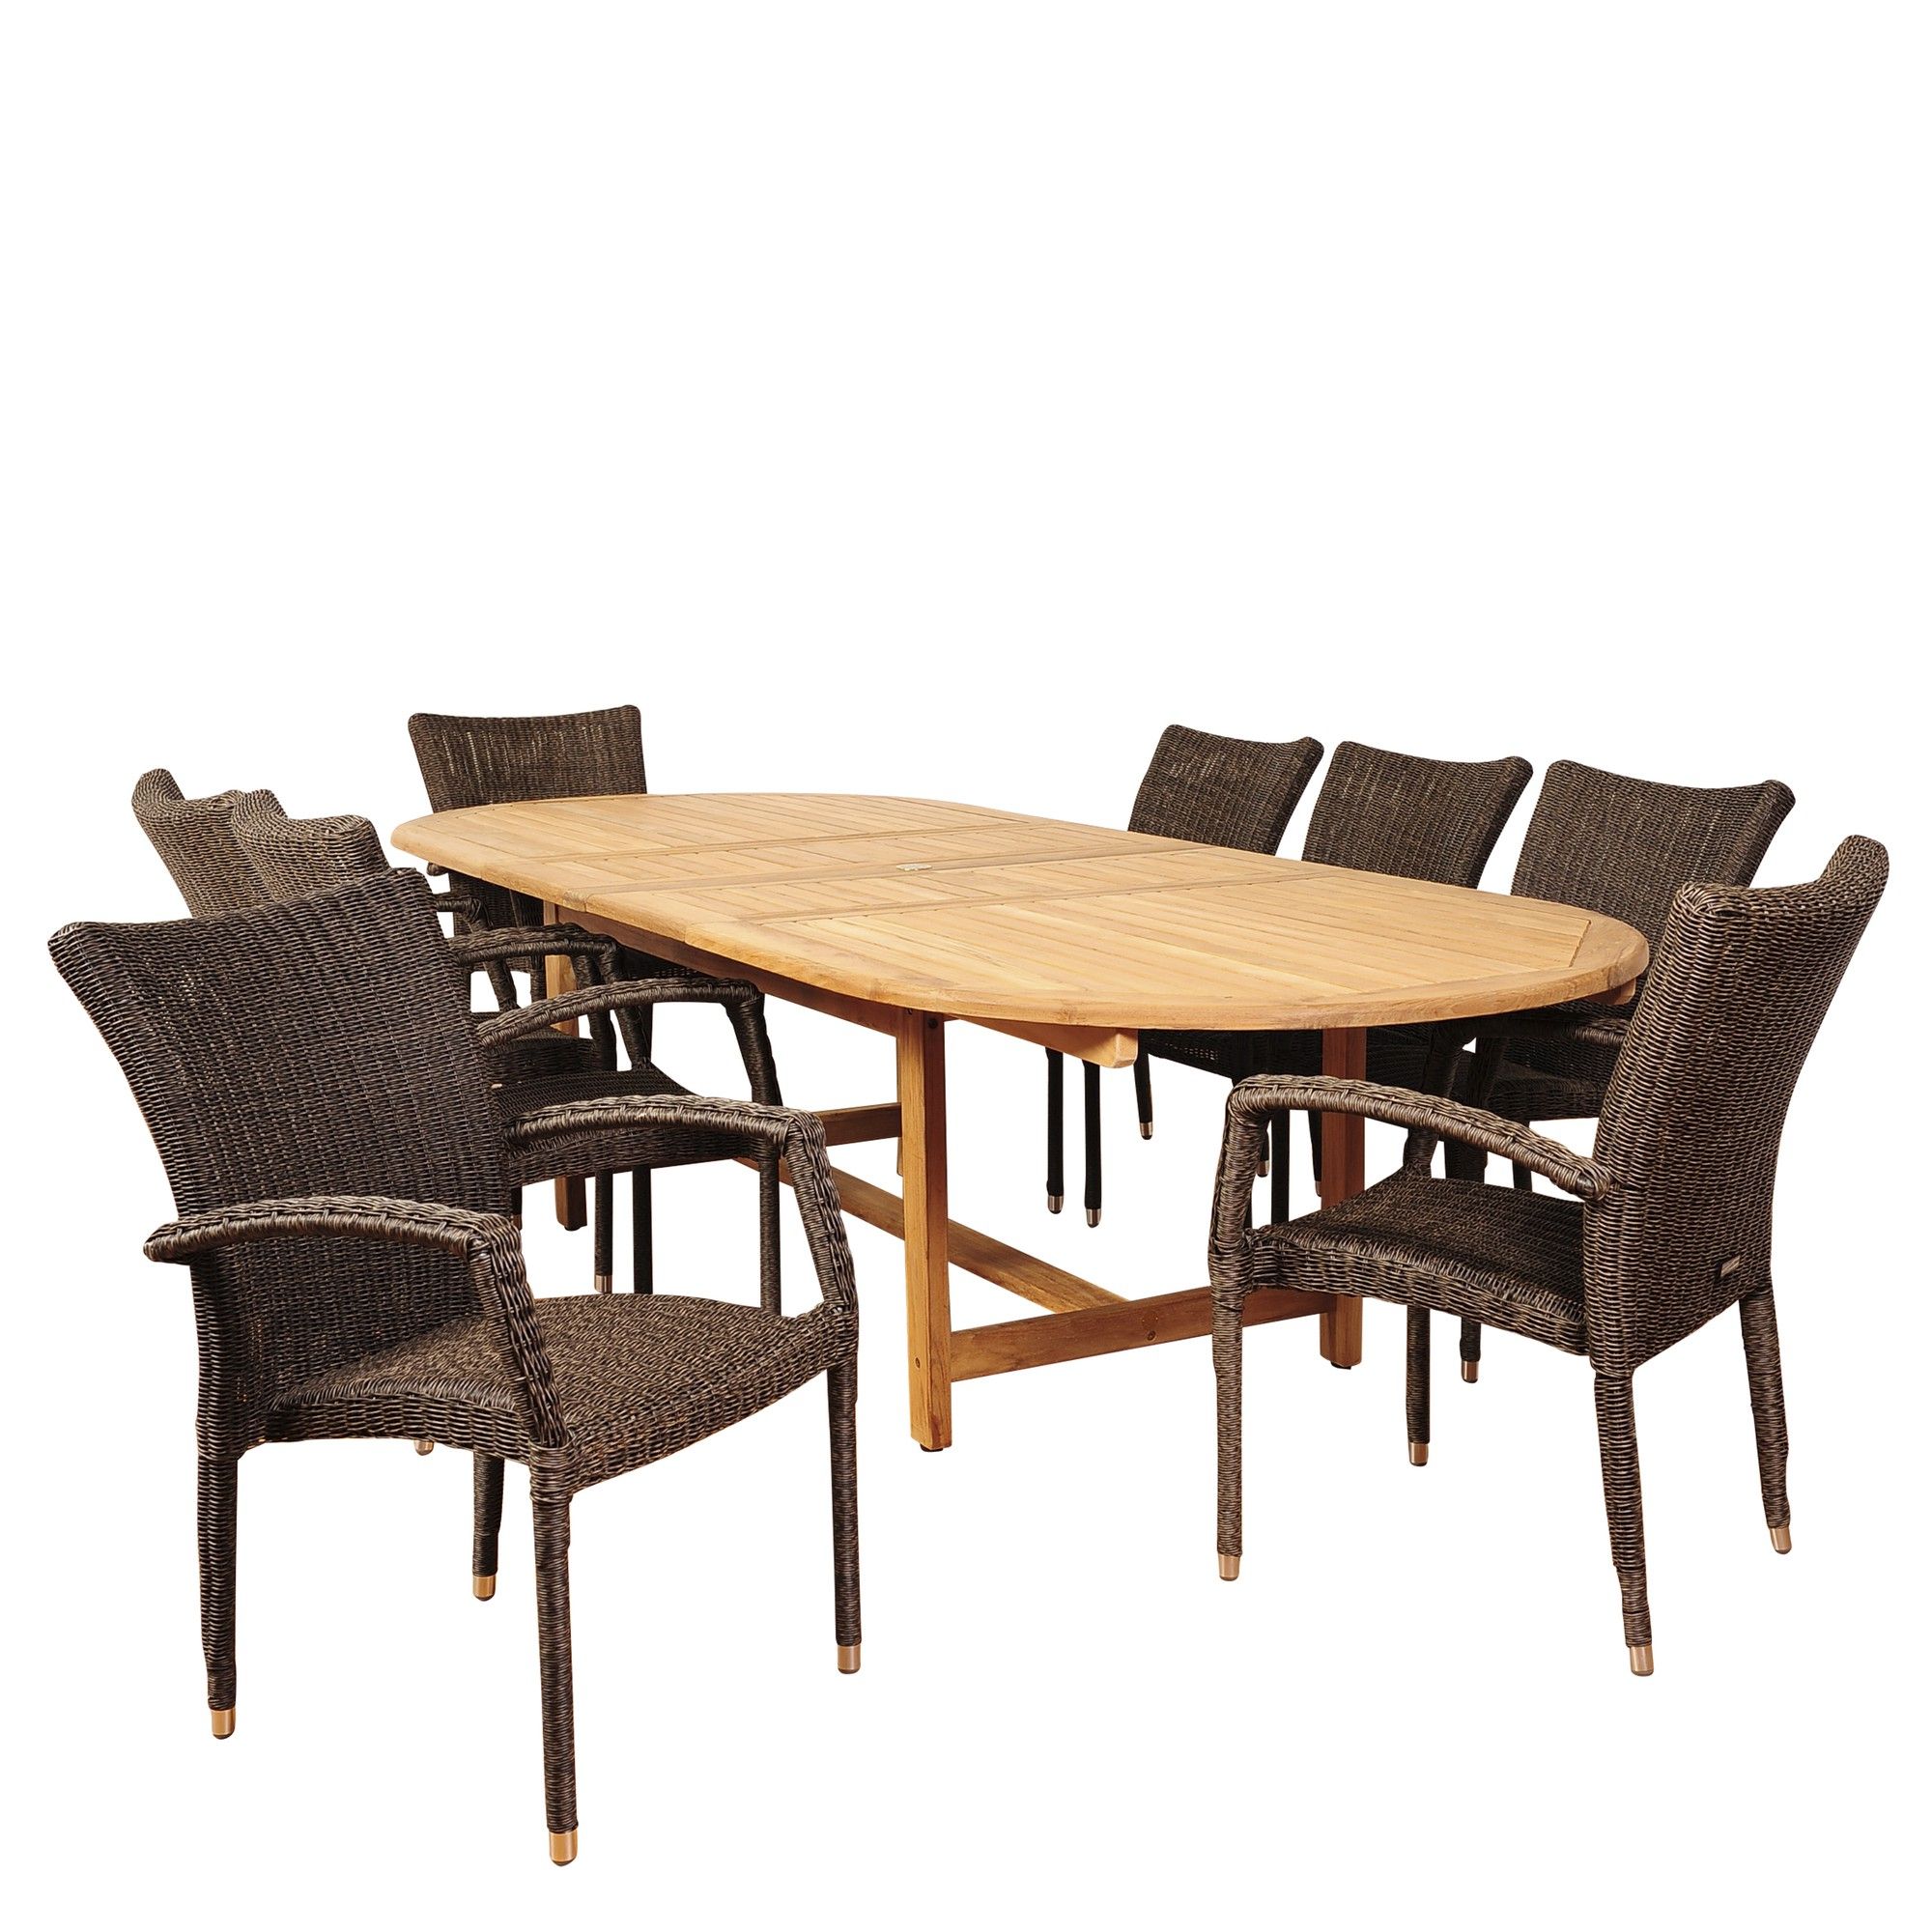 2020 Extendable Patio Dining Set With 9 Piece Brown And Gray Ocean Grove Teak Oval Double Extendable Outdoor (View 3 of 15)